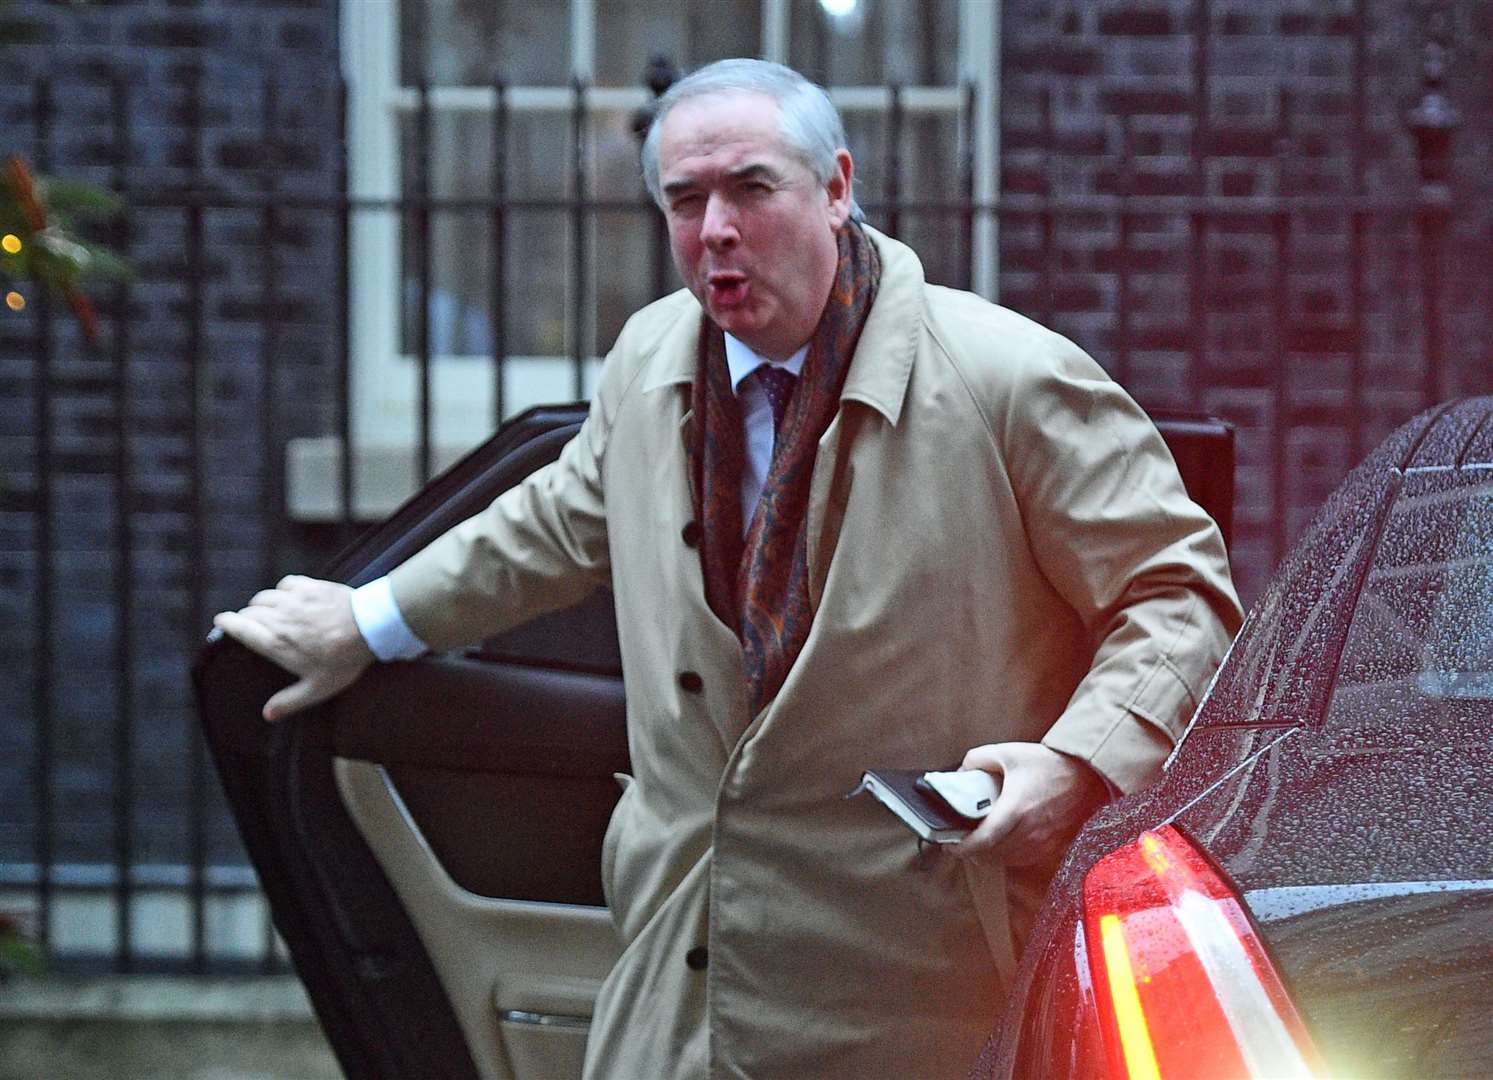 Former attorney general Geoffrey Cox was criticised for taking time off to work on a lucrative legal case, but retained the Tory whip (Kirsty O’Connor/PA)